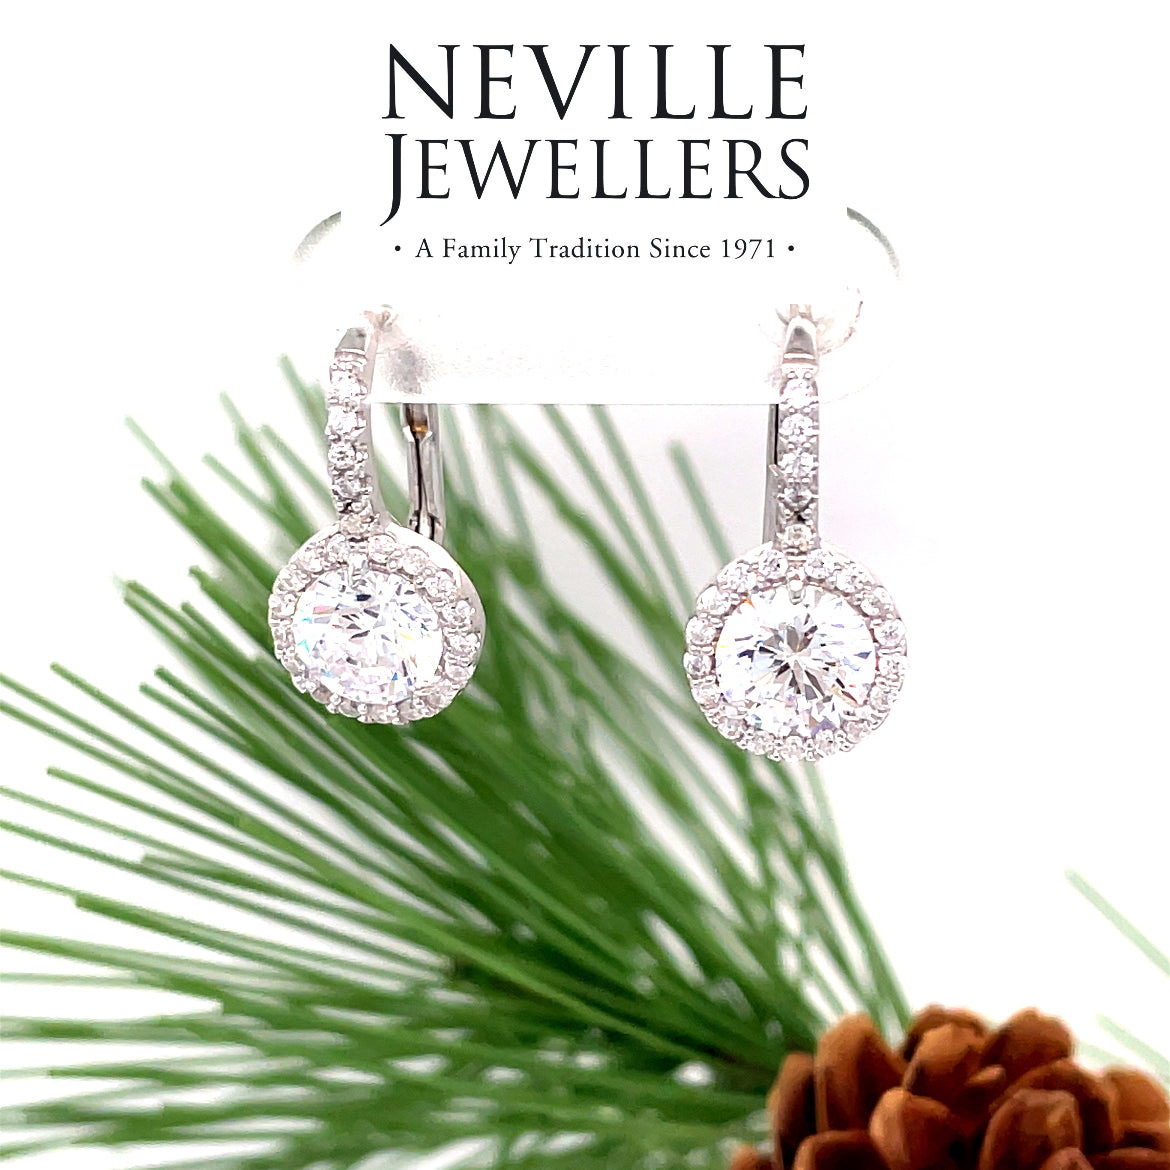 Sterling Silver White Cubic Zirconia Drop Halo Cluster Earrings